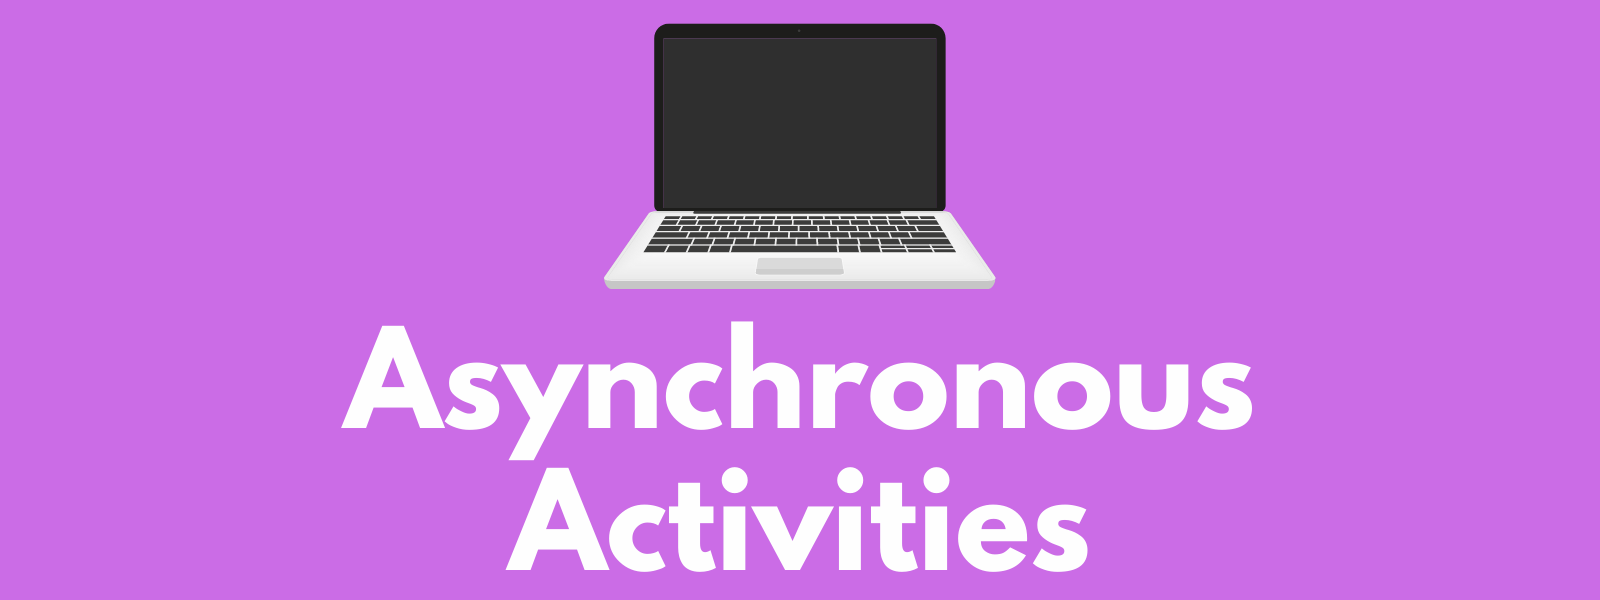 Asynchronous Activities